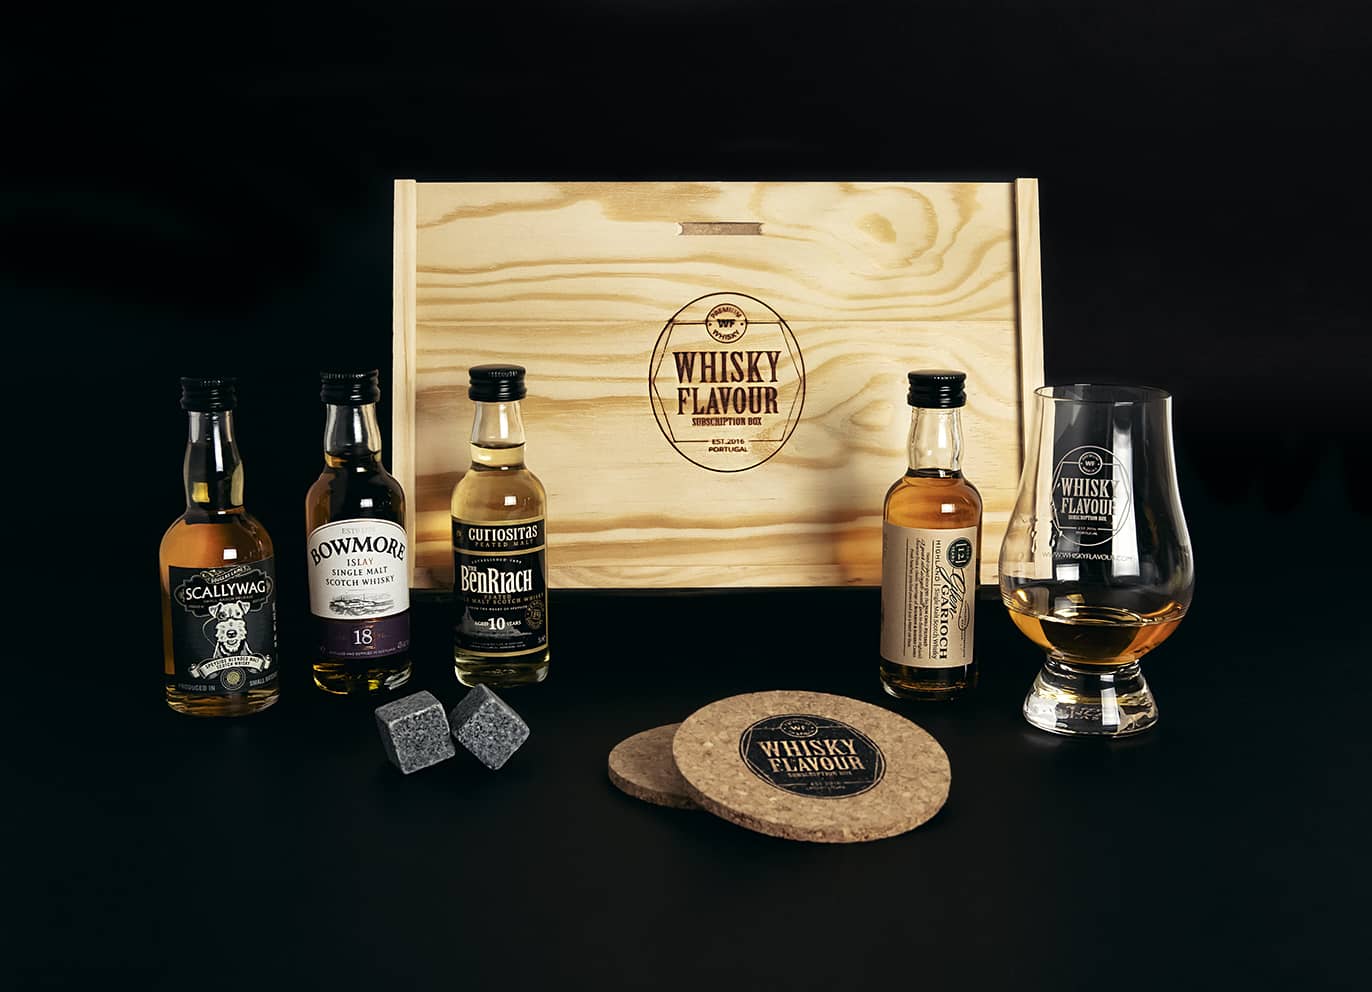 The Whisky Subscription Box from Whisky Flavour